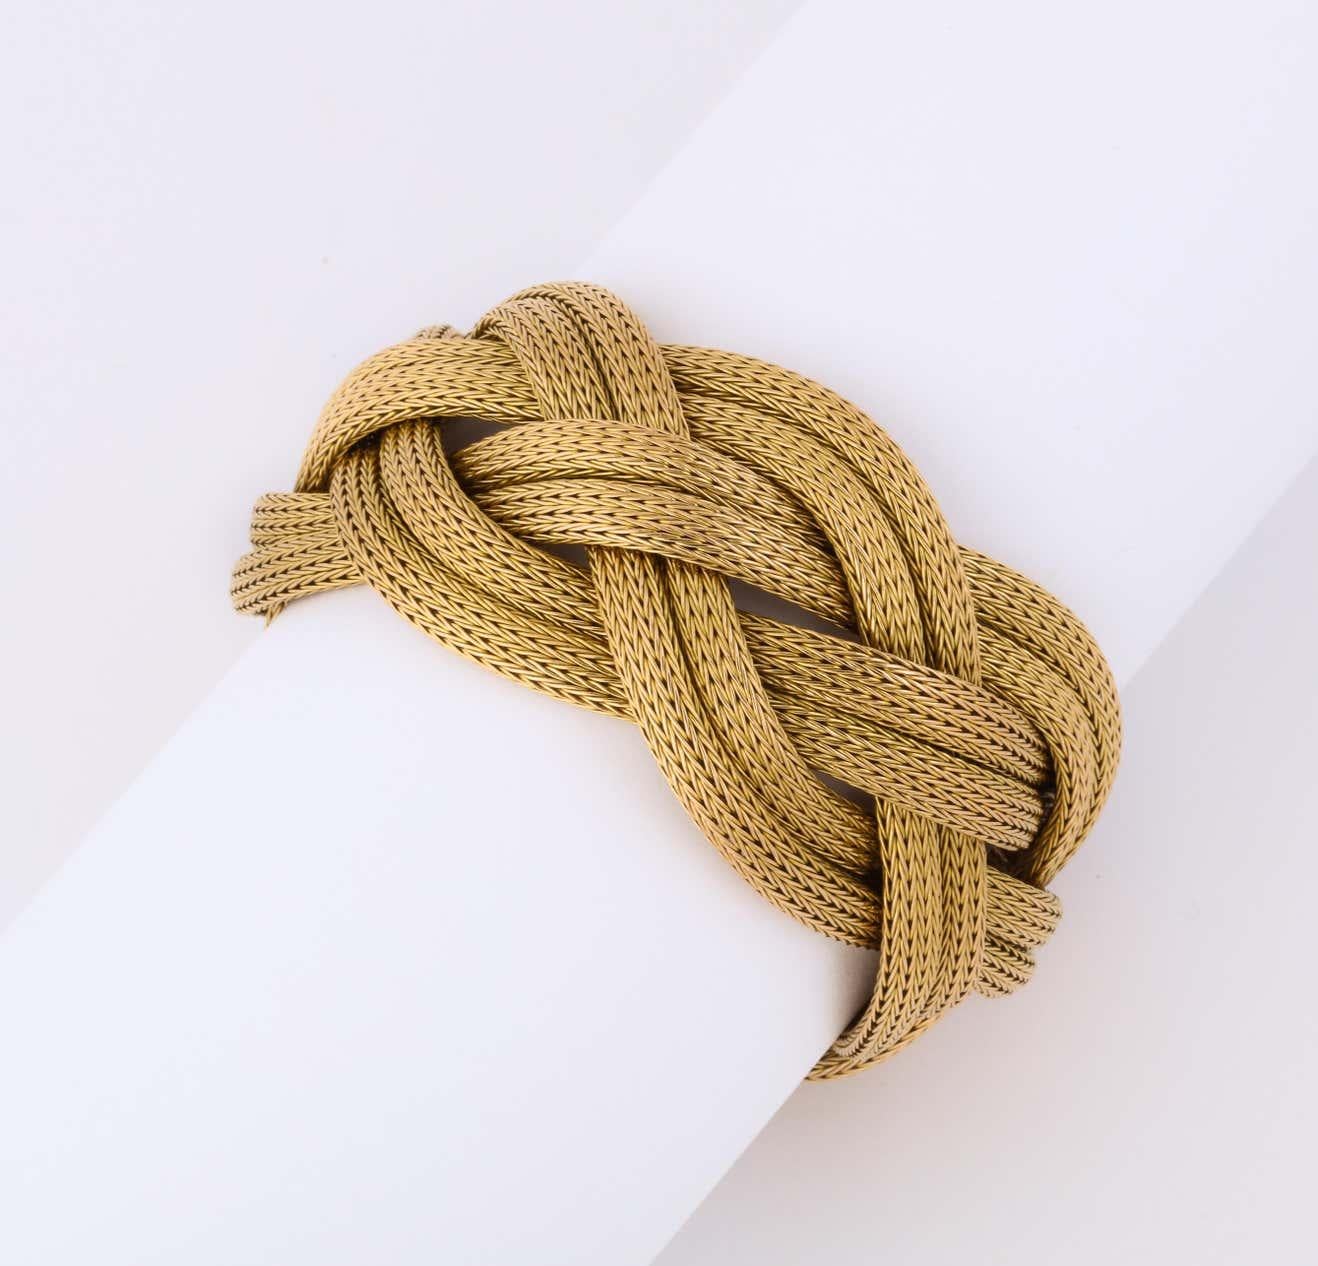 One Ladies 18kt Gold Flexible Mesh Bracelet Designed In An Interlocking Twist And Braided Motif. Circa 1960's. Designed By Tambetti Jewelers.